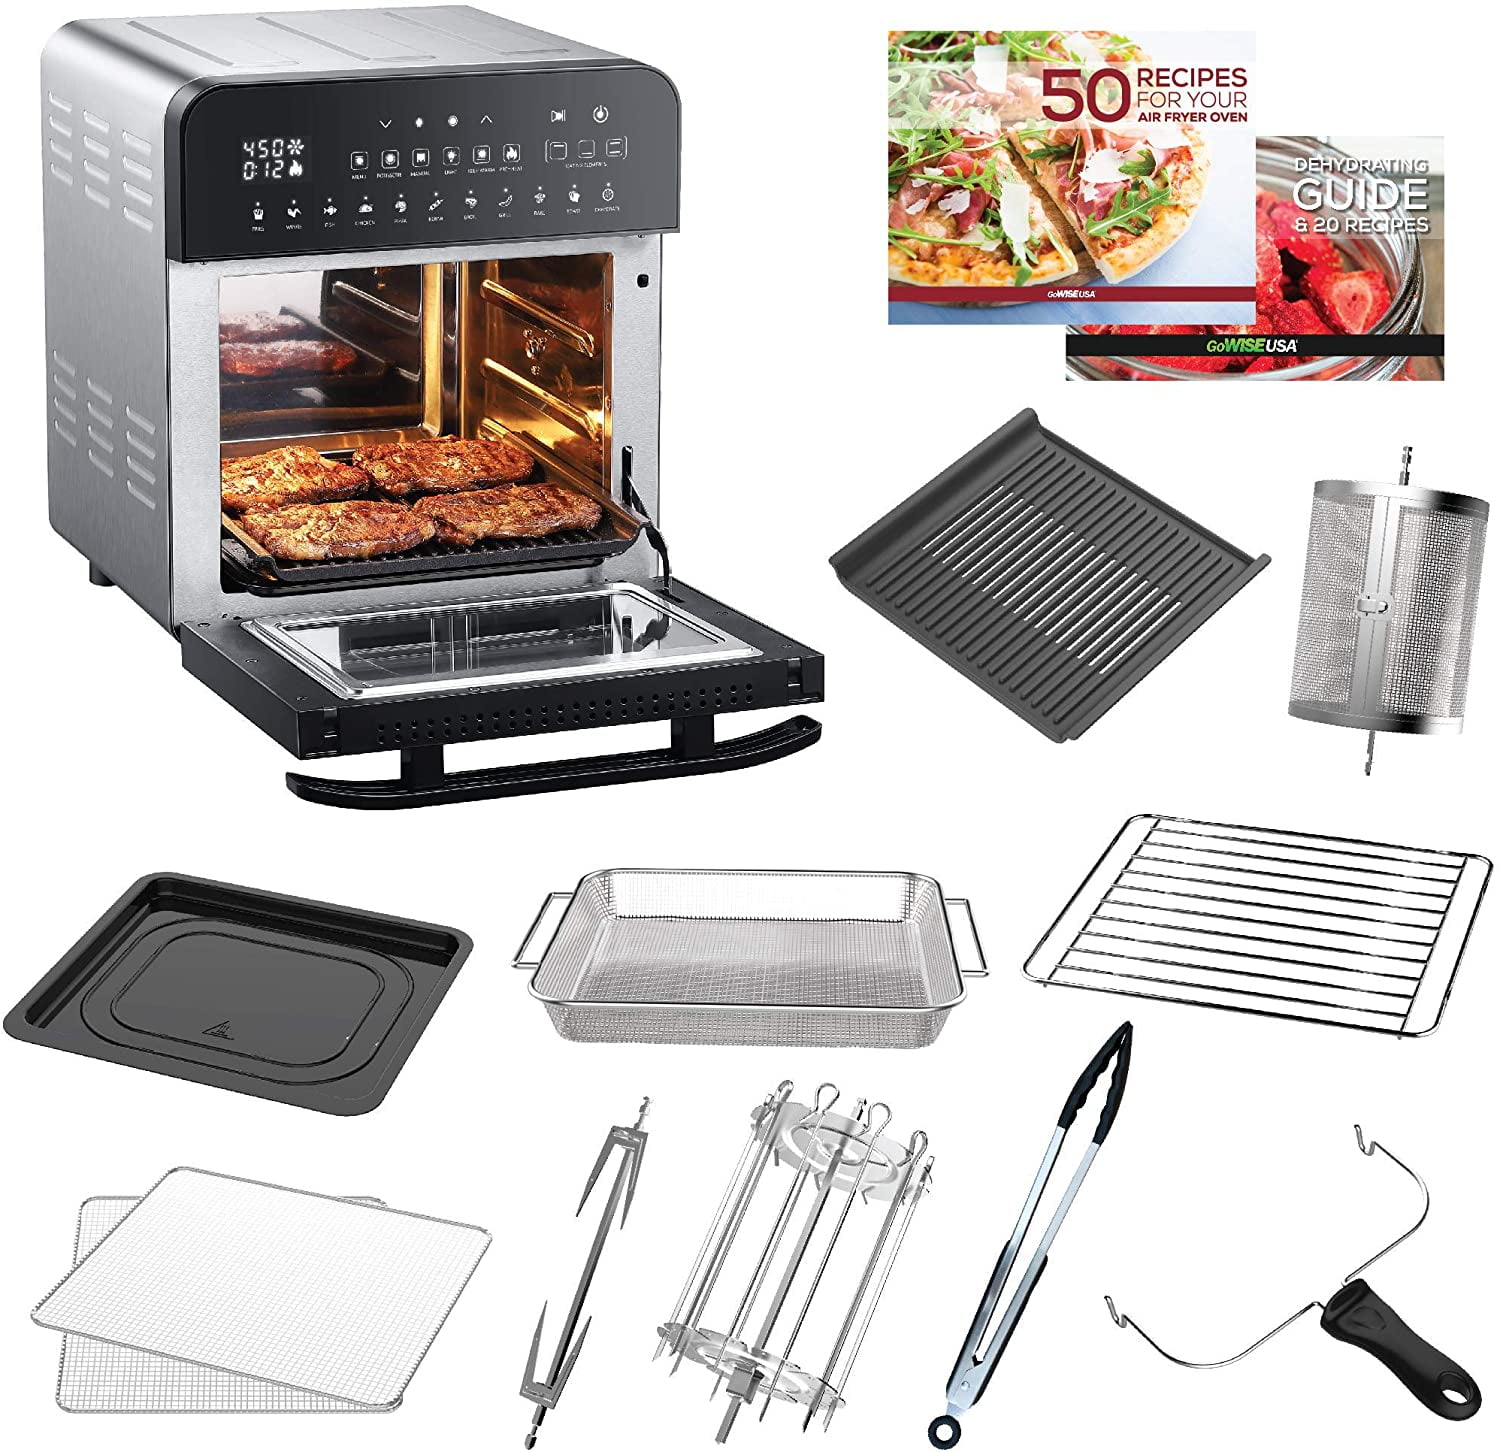 XL 5.8 Quart LED Digital Touchscreen Hot Air Fryer with Recipe Books and BBQ rack Skewers Accessories,Oven Oilless Cooker DOIT